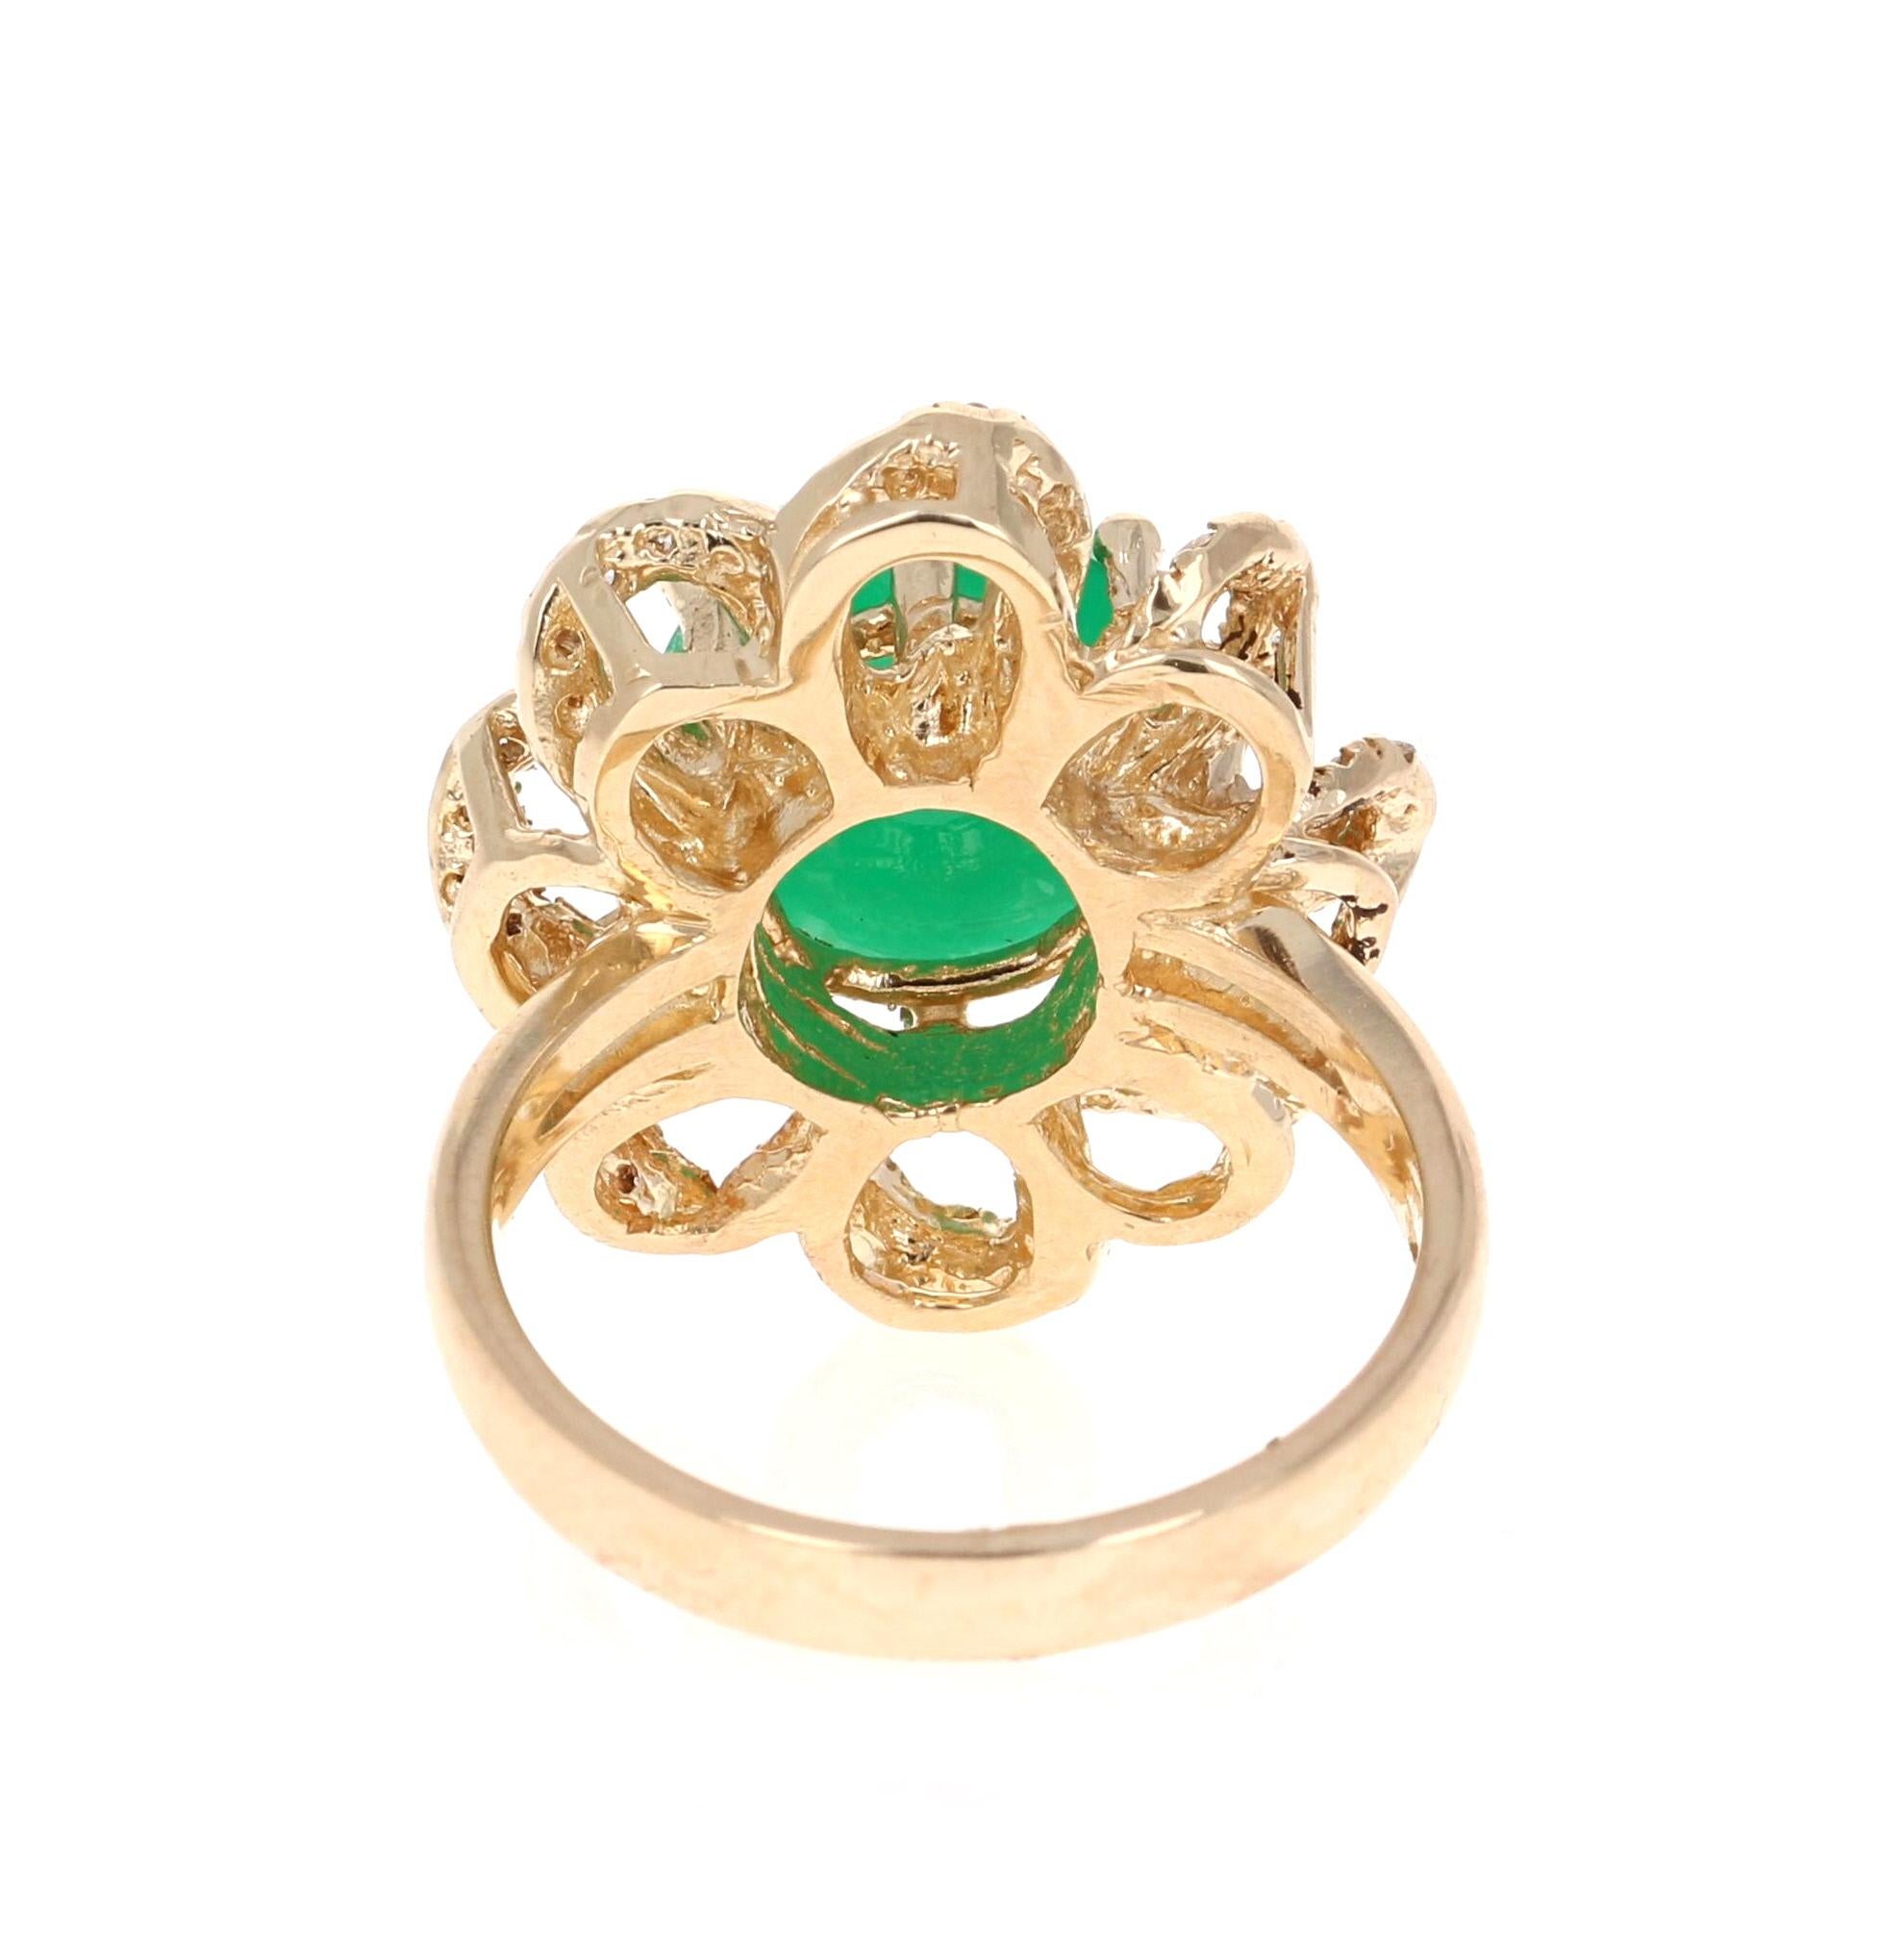 Contemporary 6.24 Carat Cabochon Emerald Diamond Yellow Gold Cocktail Ring For Sale